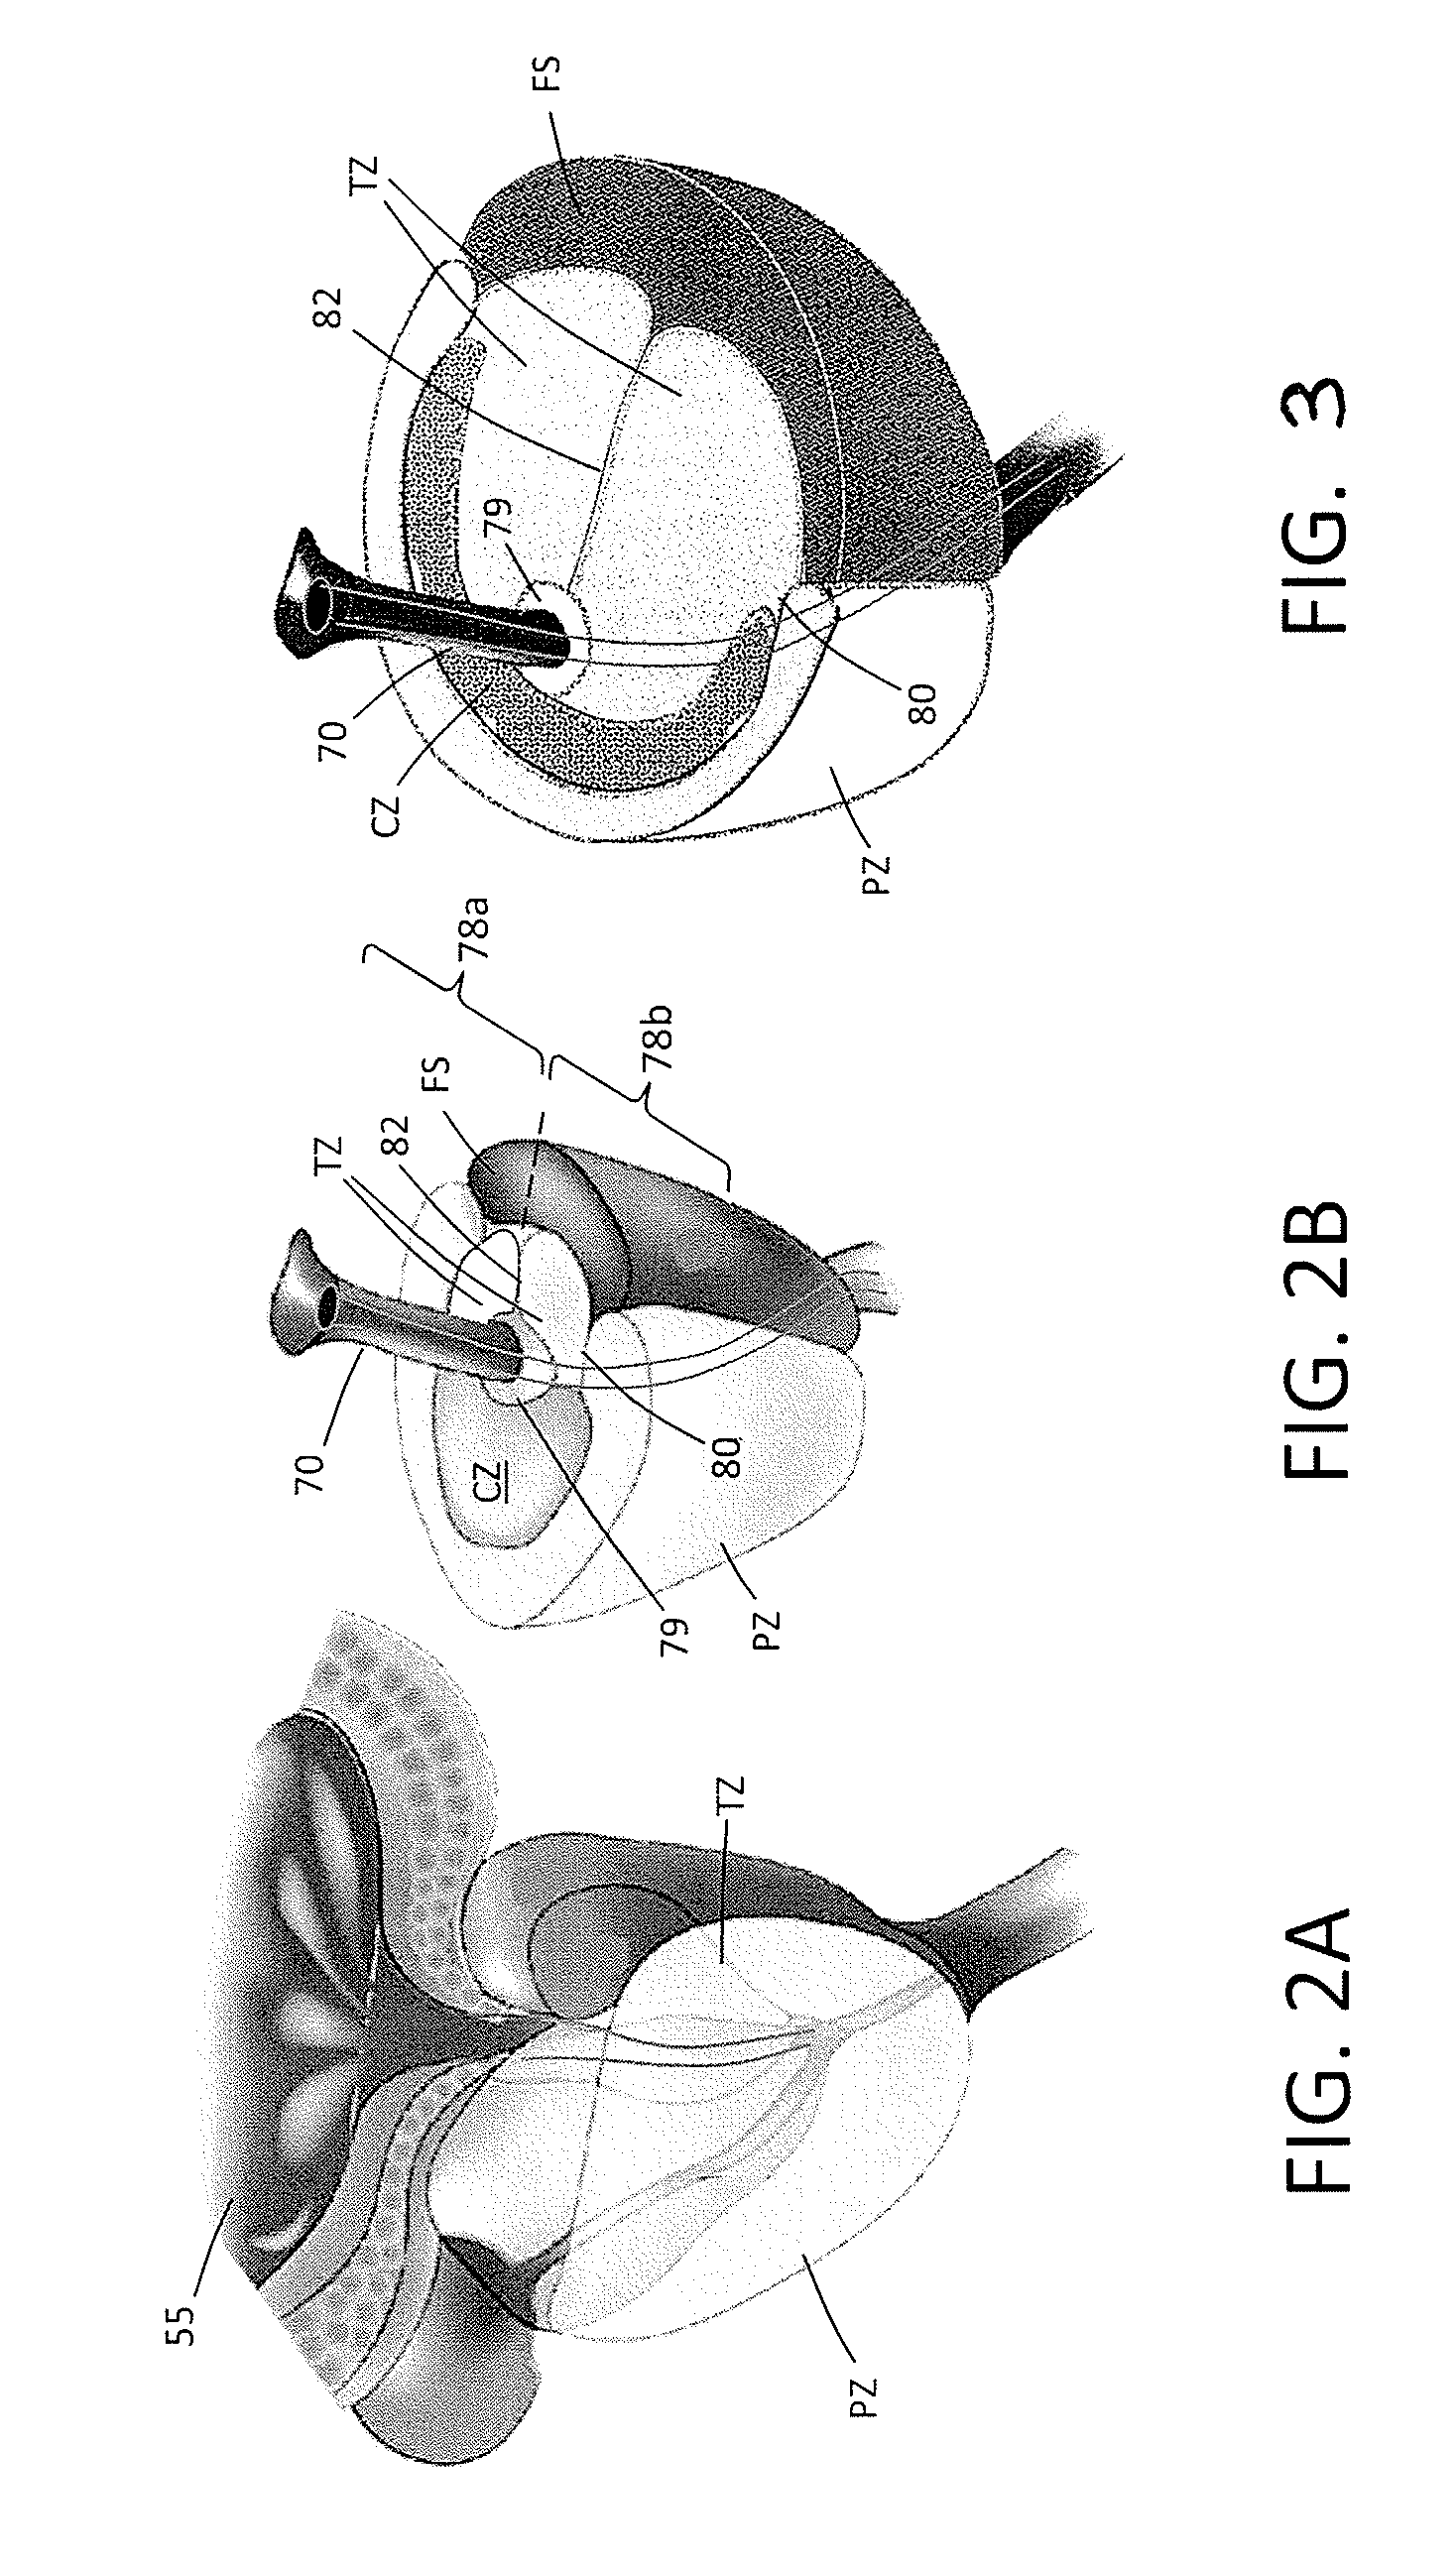 Systems and Methods for Prostate Treatment